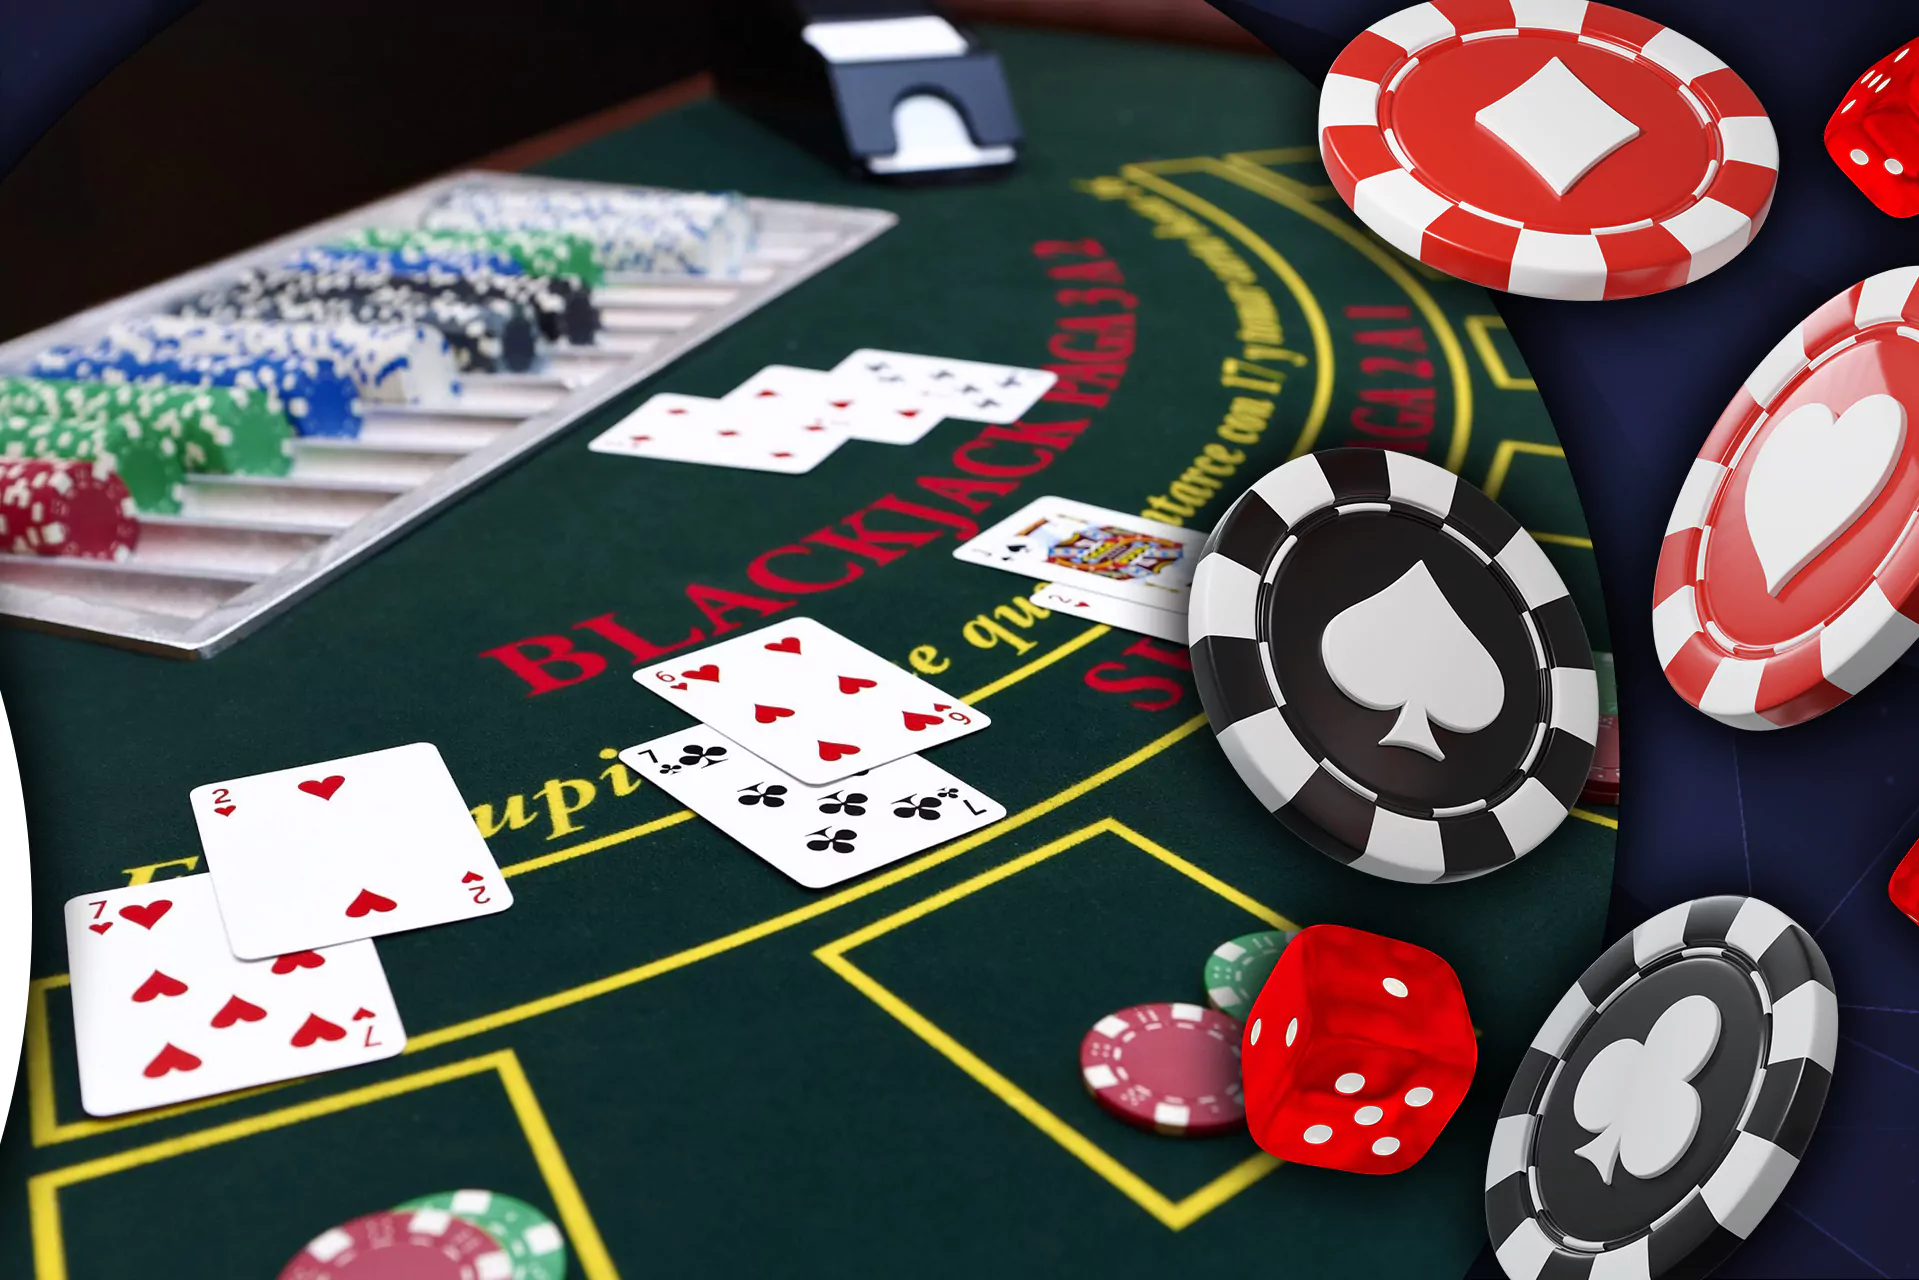 Try to win money by collecting 21 points in blackjack.